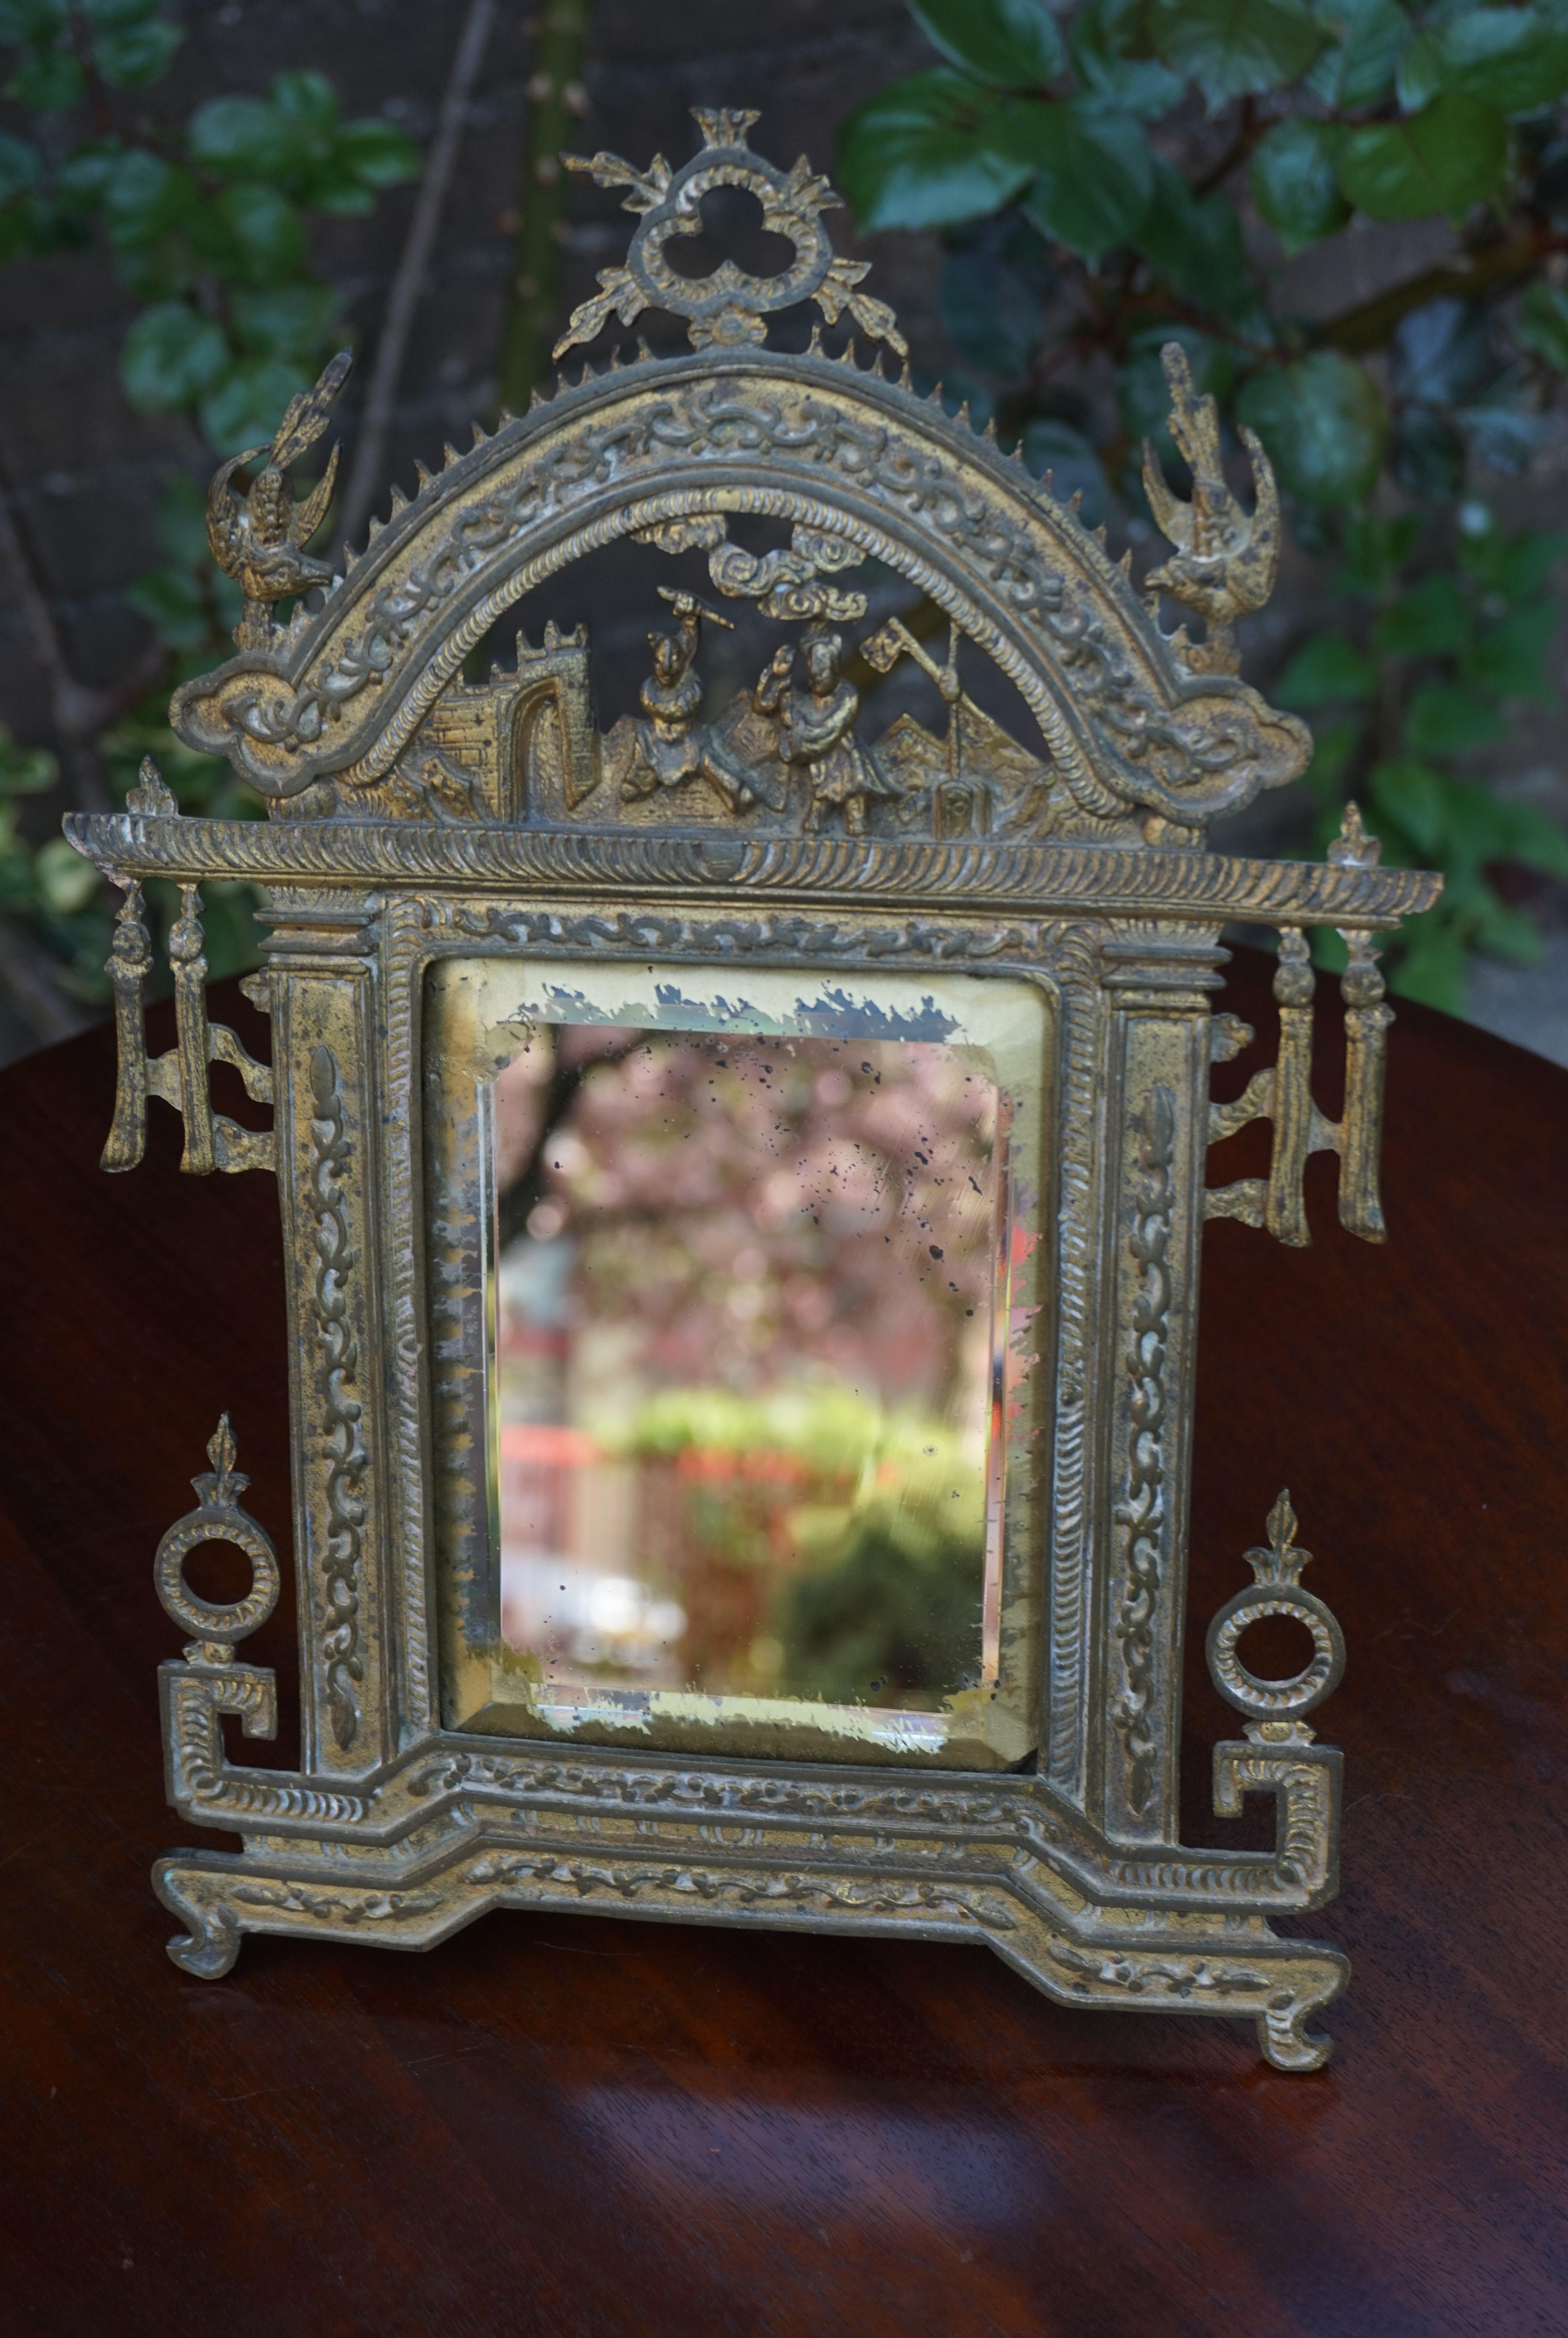 Late 19th or Early 20th Century Chinese or Chinoiserie Gilt Ormolu Table Mirror For Sale 9